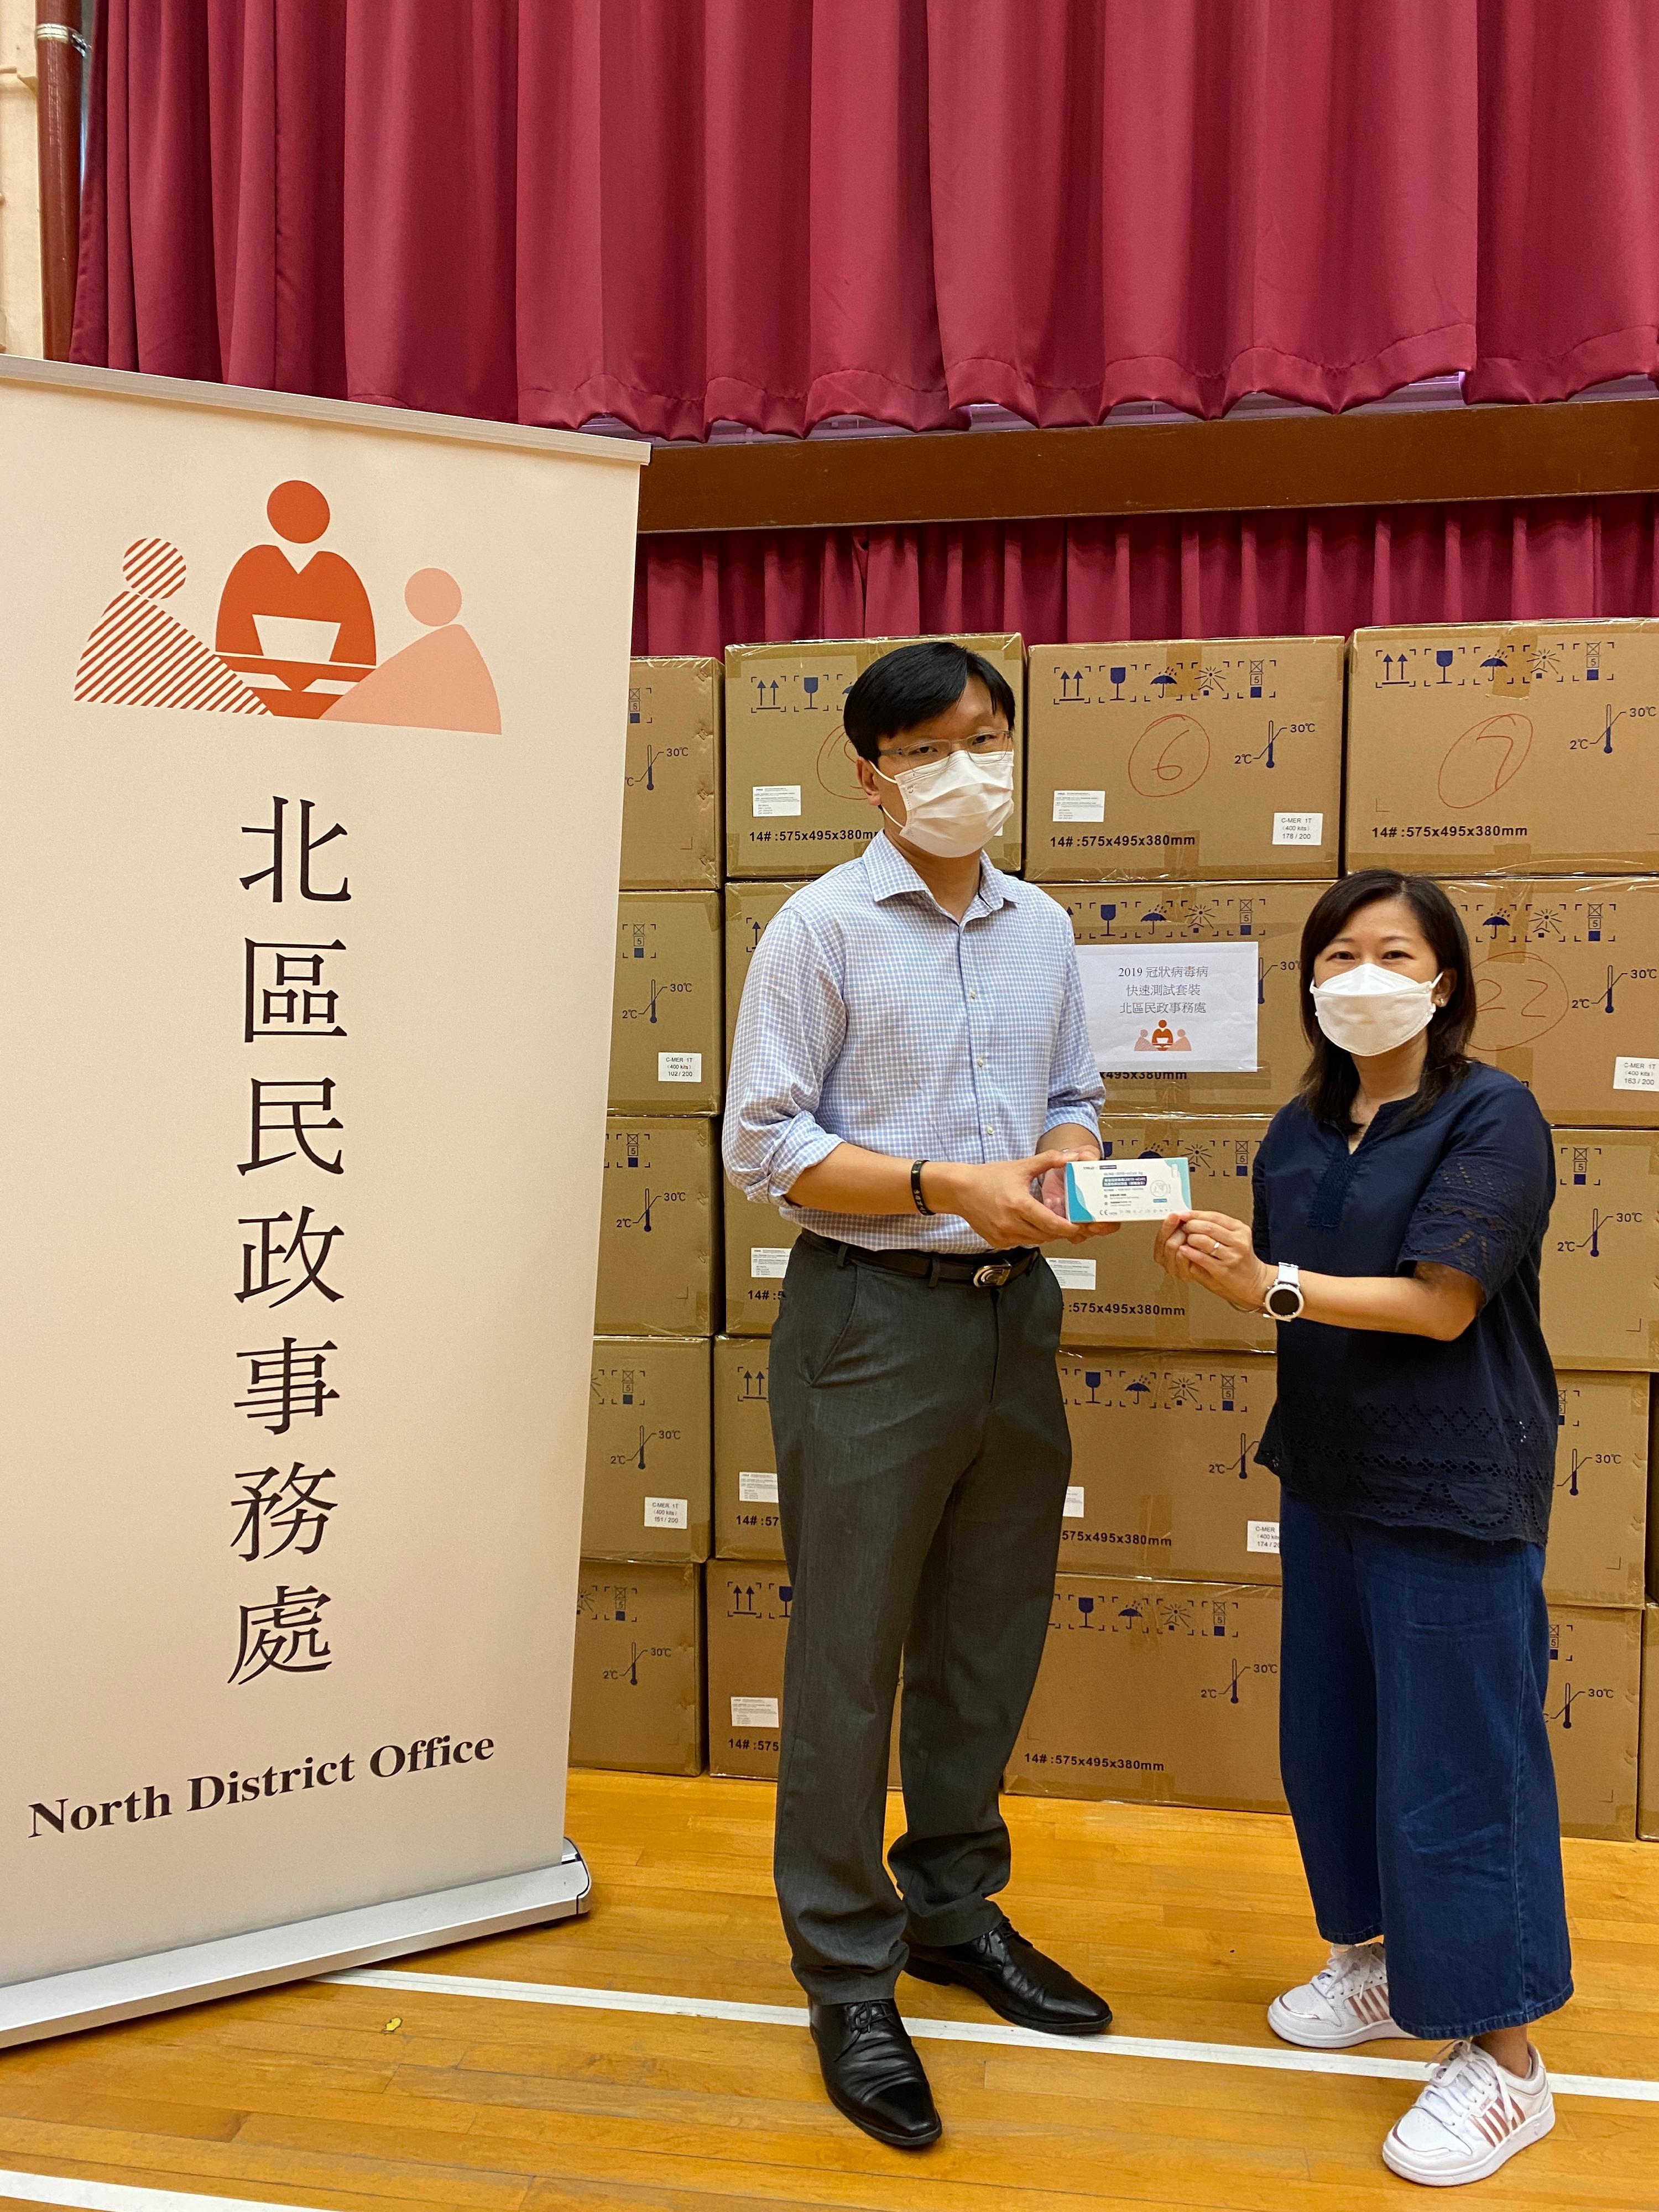 The North District Office today (May 27) distributed COVID-19 rapid test kits to households, cleansing workers and property management staff living and working in Ka Shing Court for voluntary testing through the property management company.